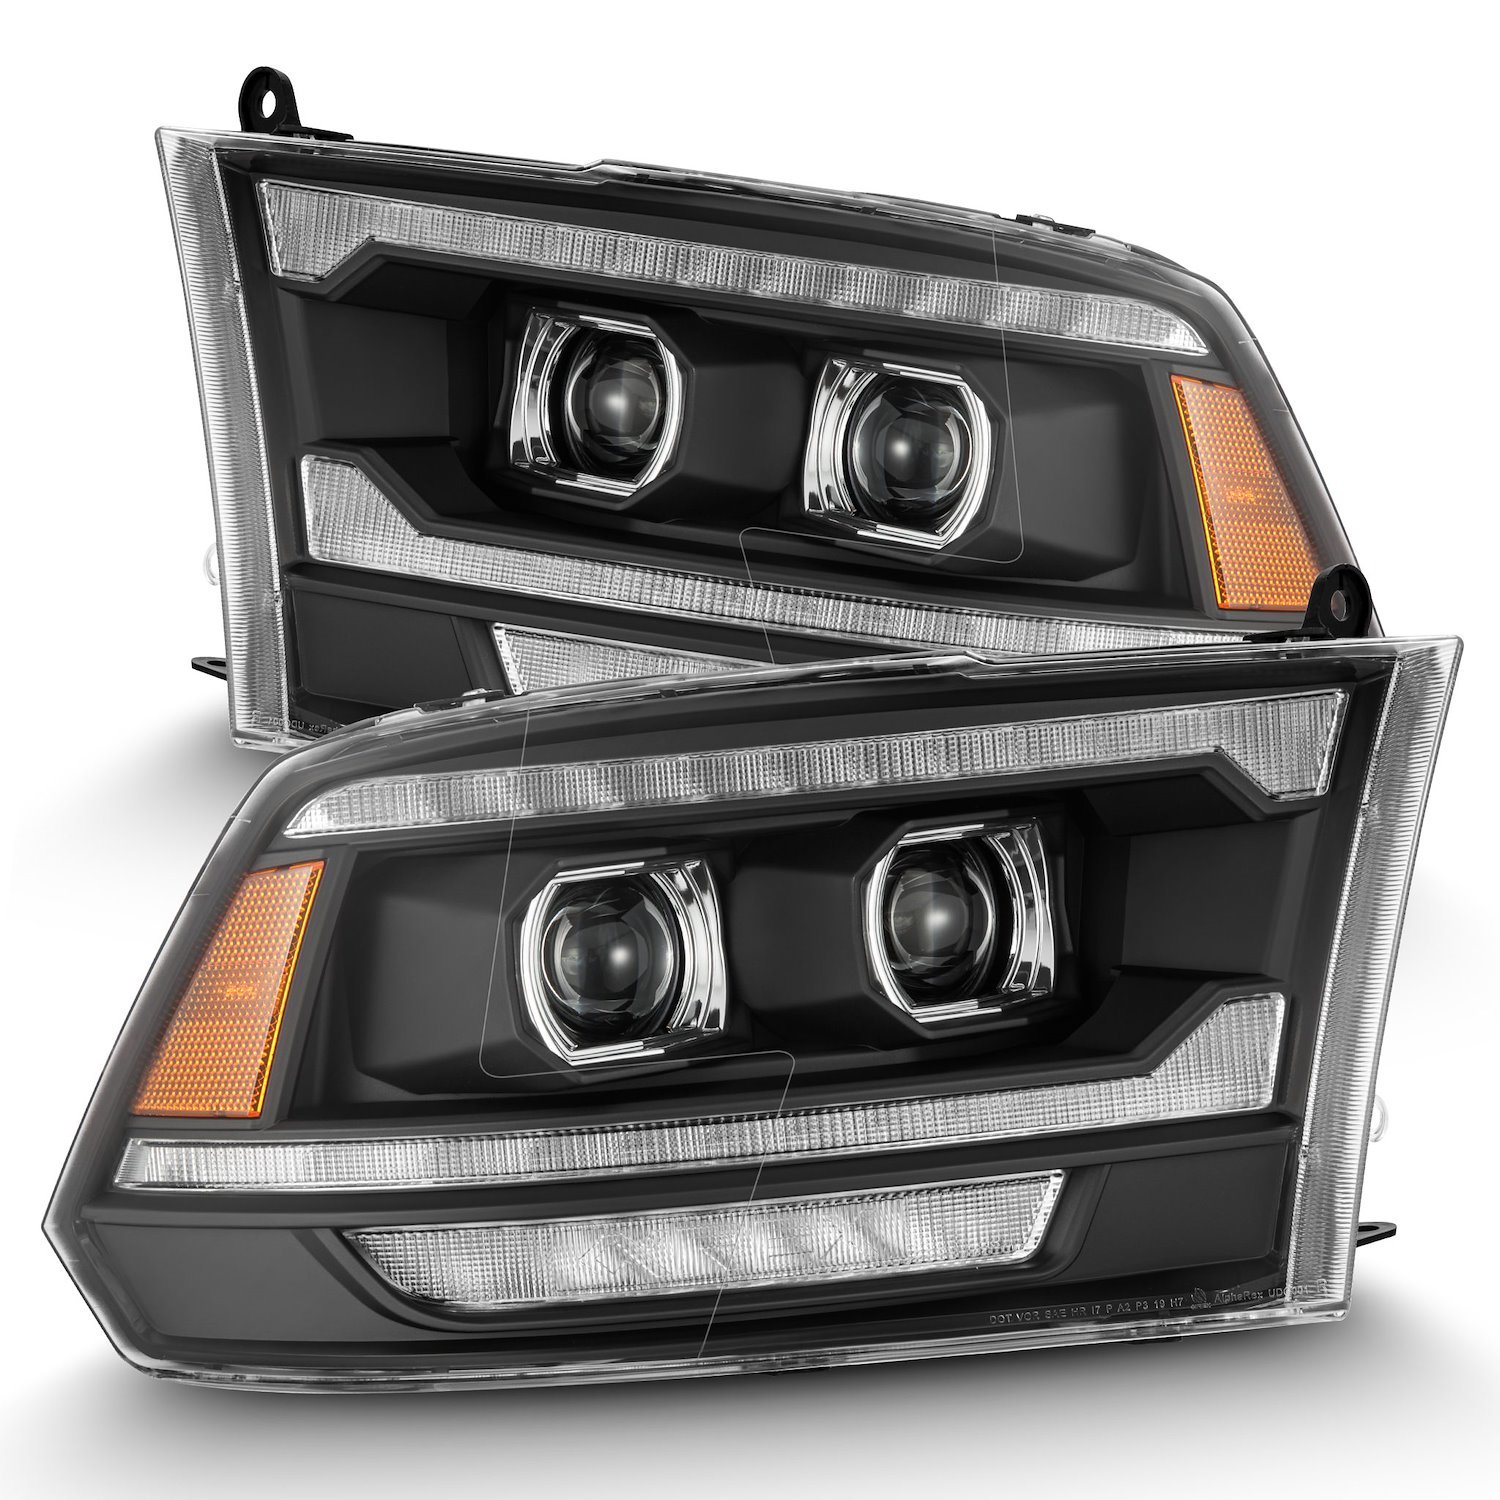 880558 Luxx-Series LED Projector Headlights for 2009-2018 Dodge/RAM 1500/2500/3500 - Black